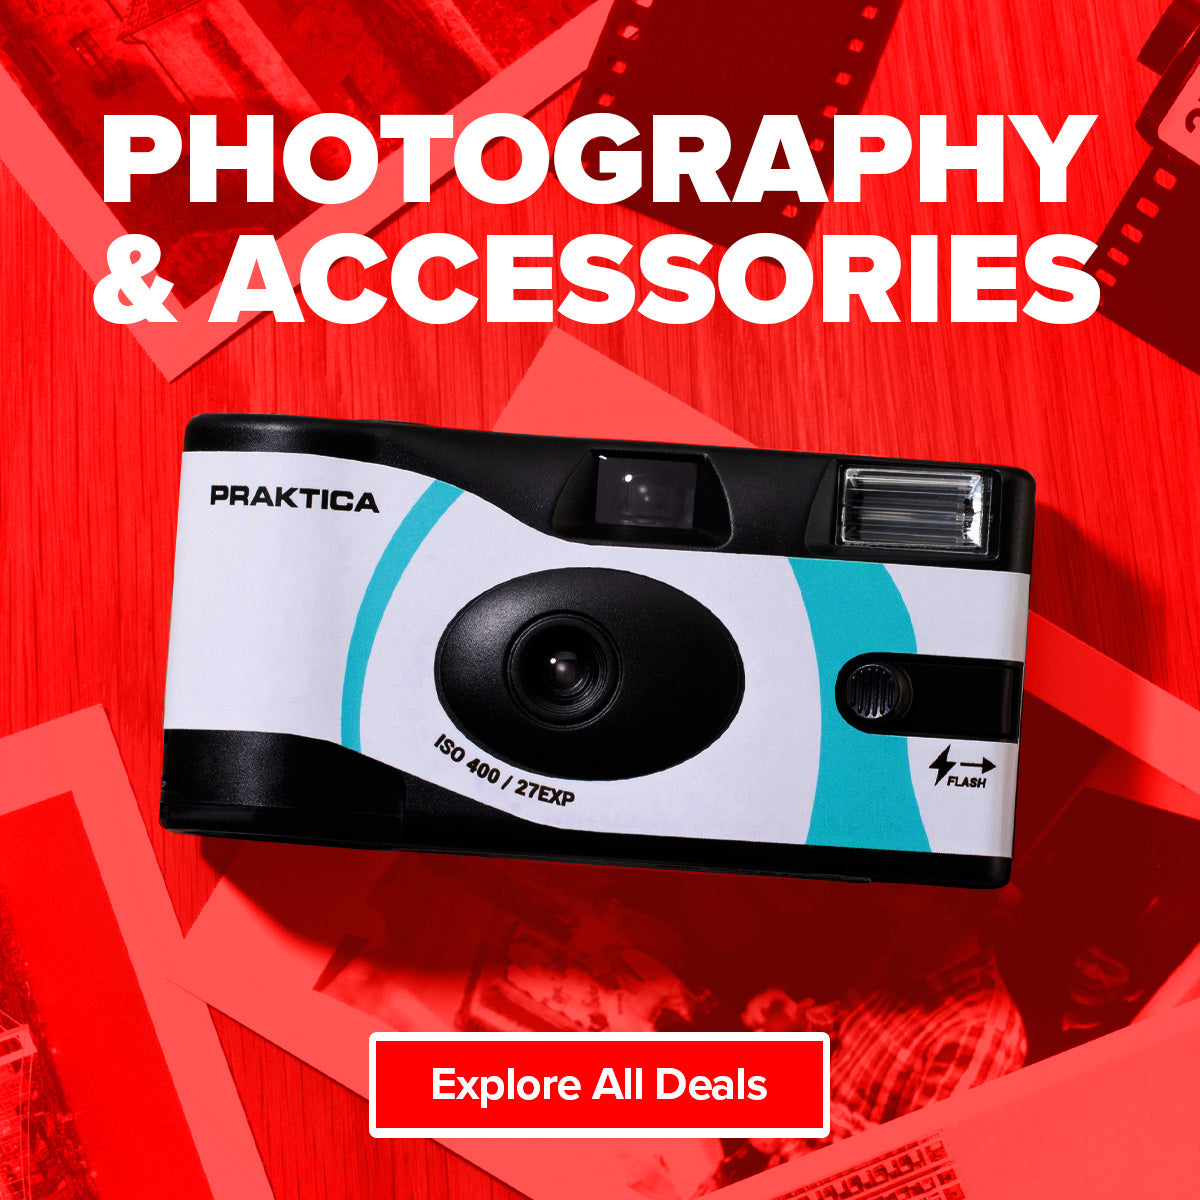 14% off Photography in Maplin's Valentine's Day Sale!